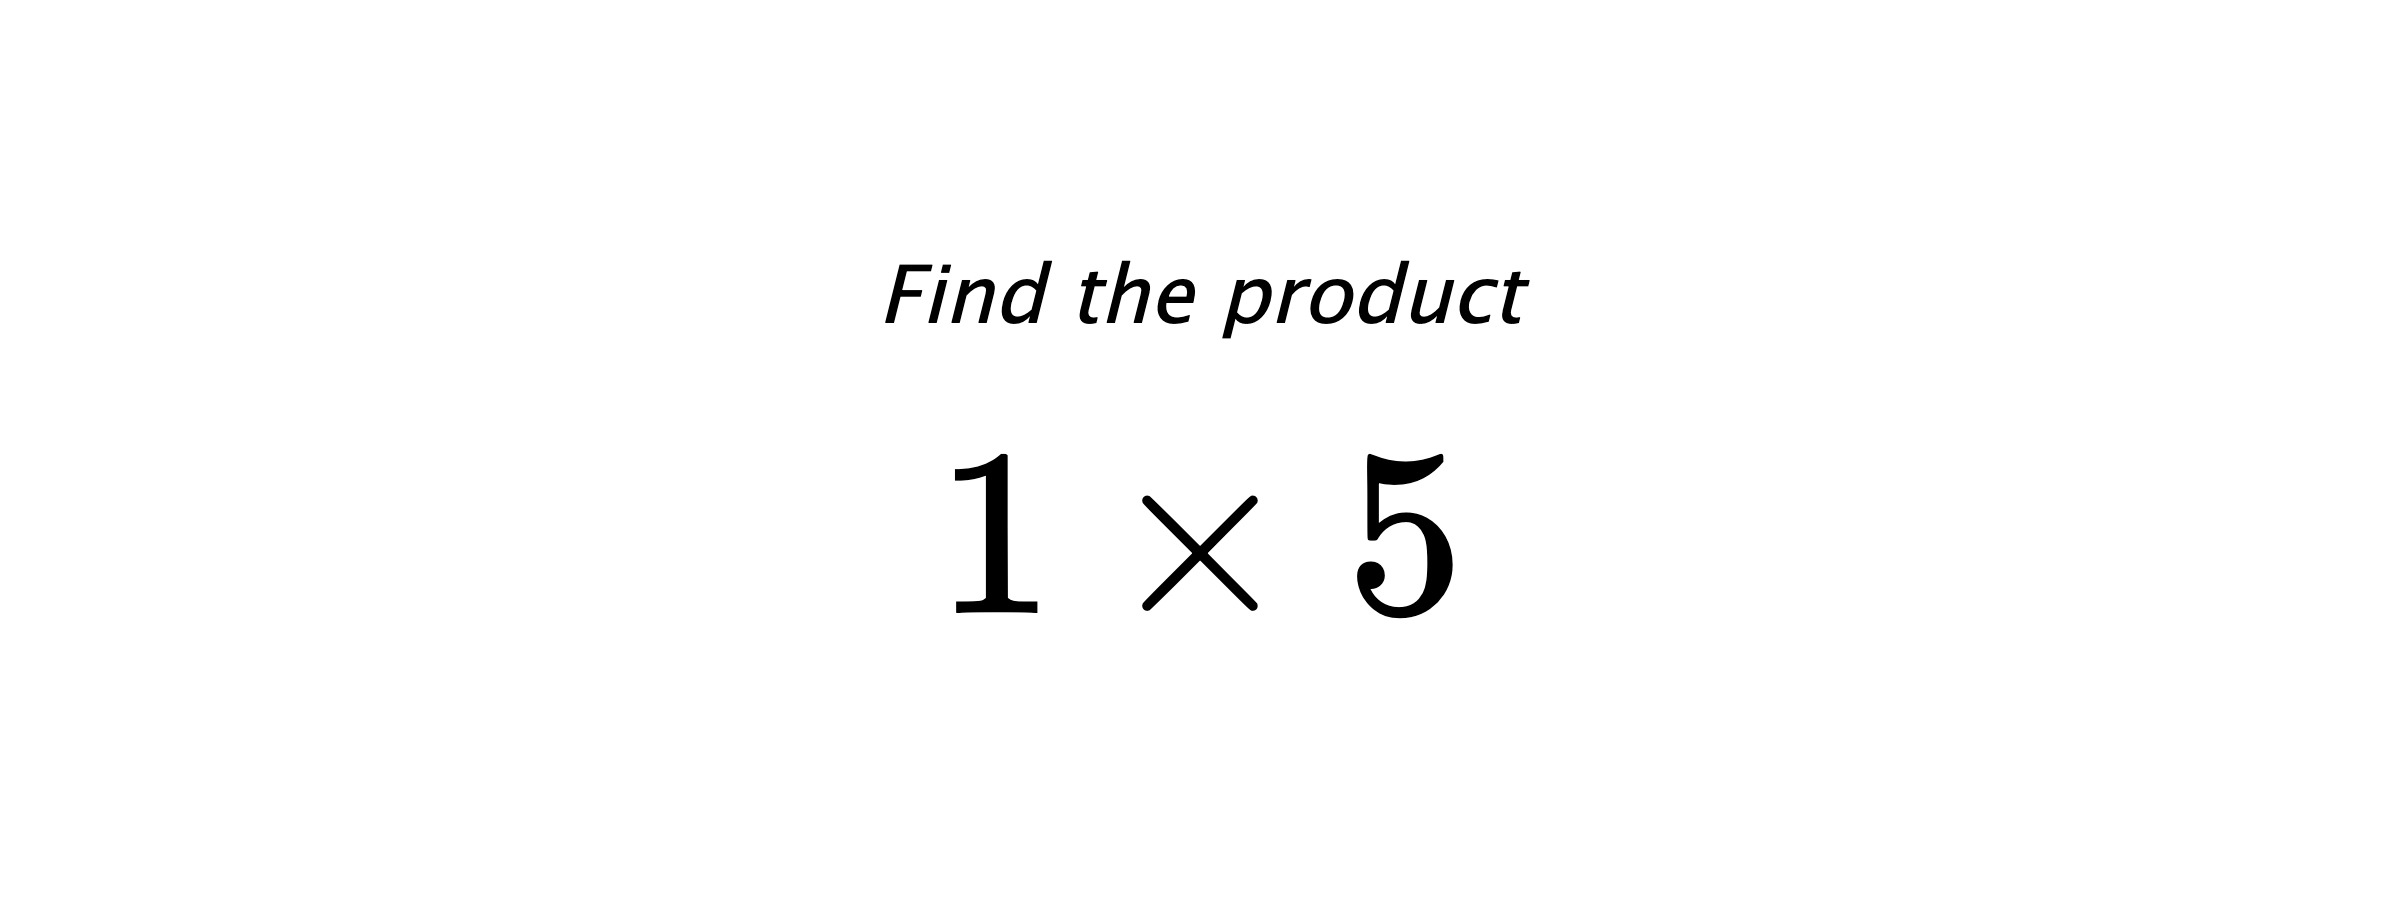 Find the product $ 1 \times 5 $